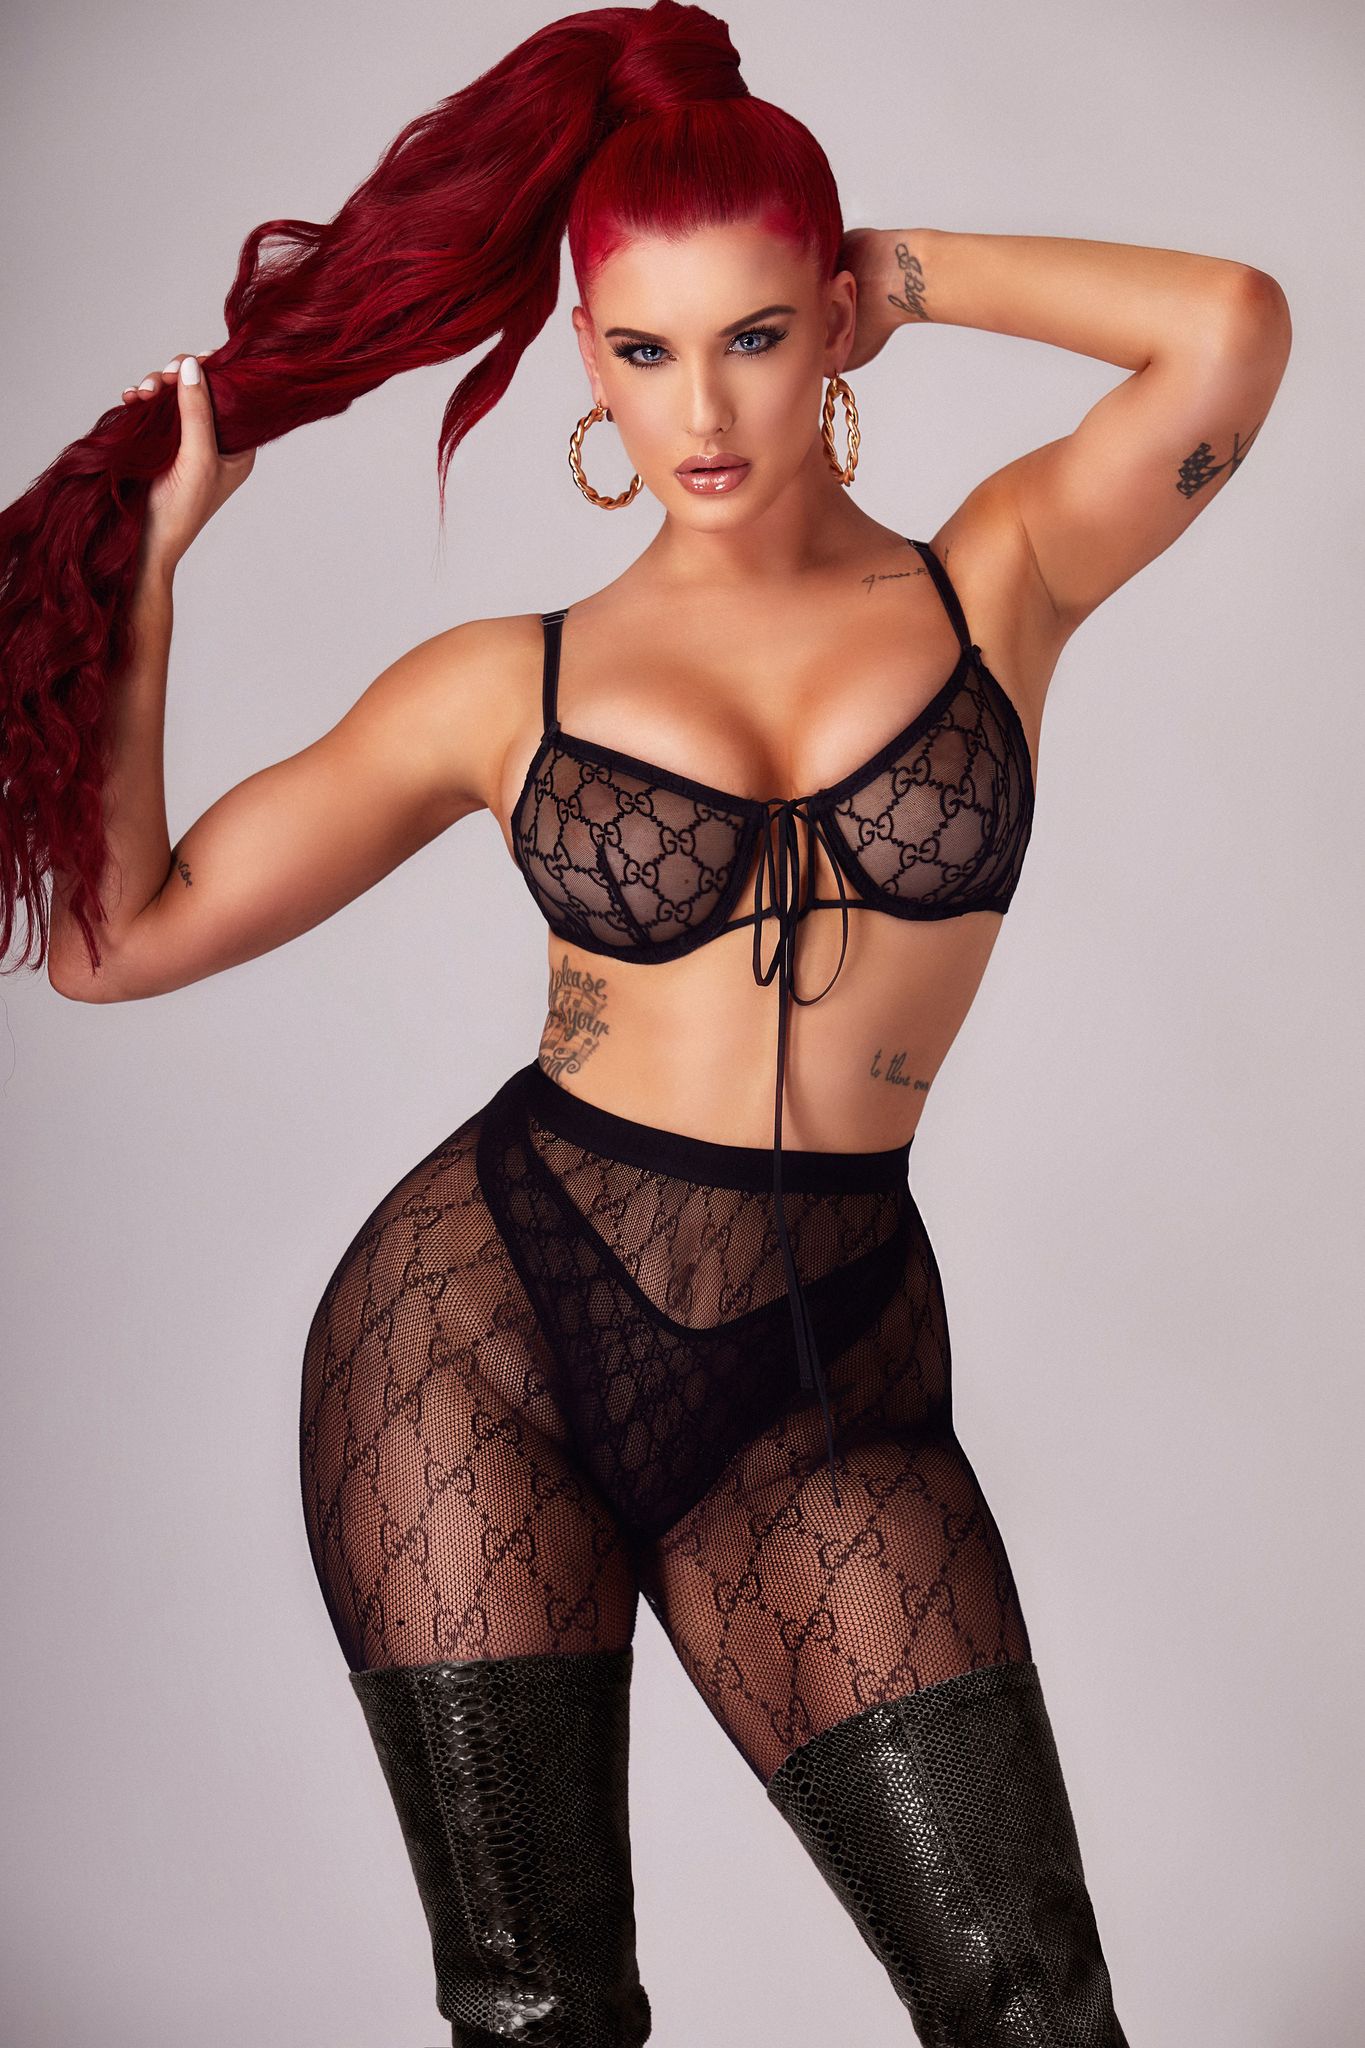 Justina valentine only fans pics